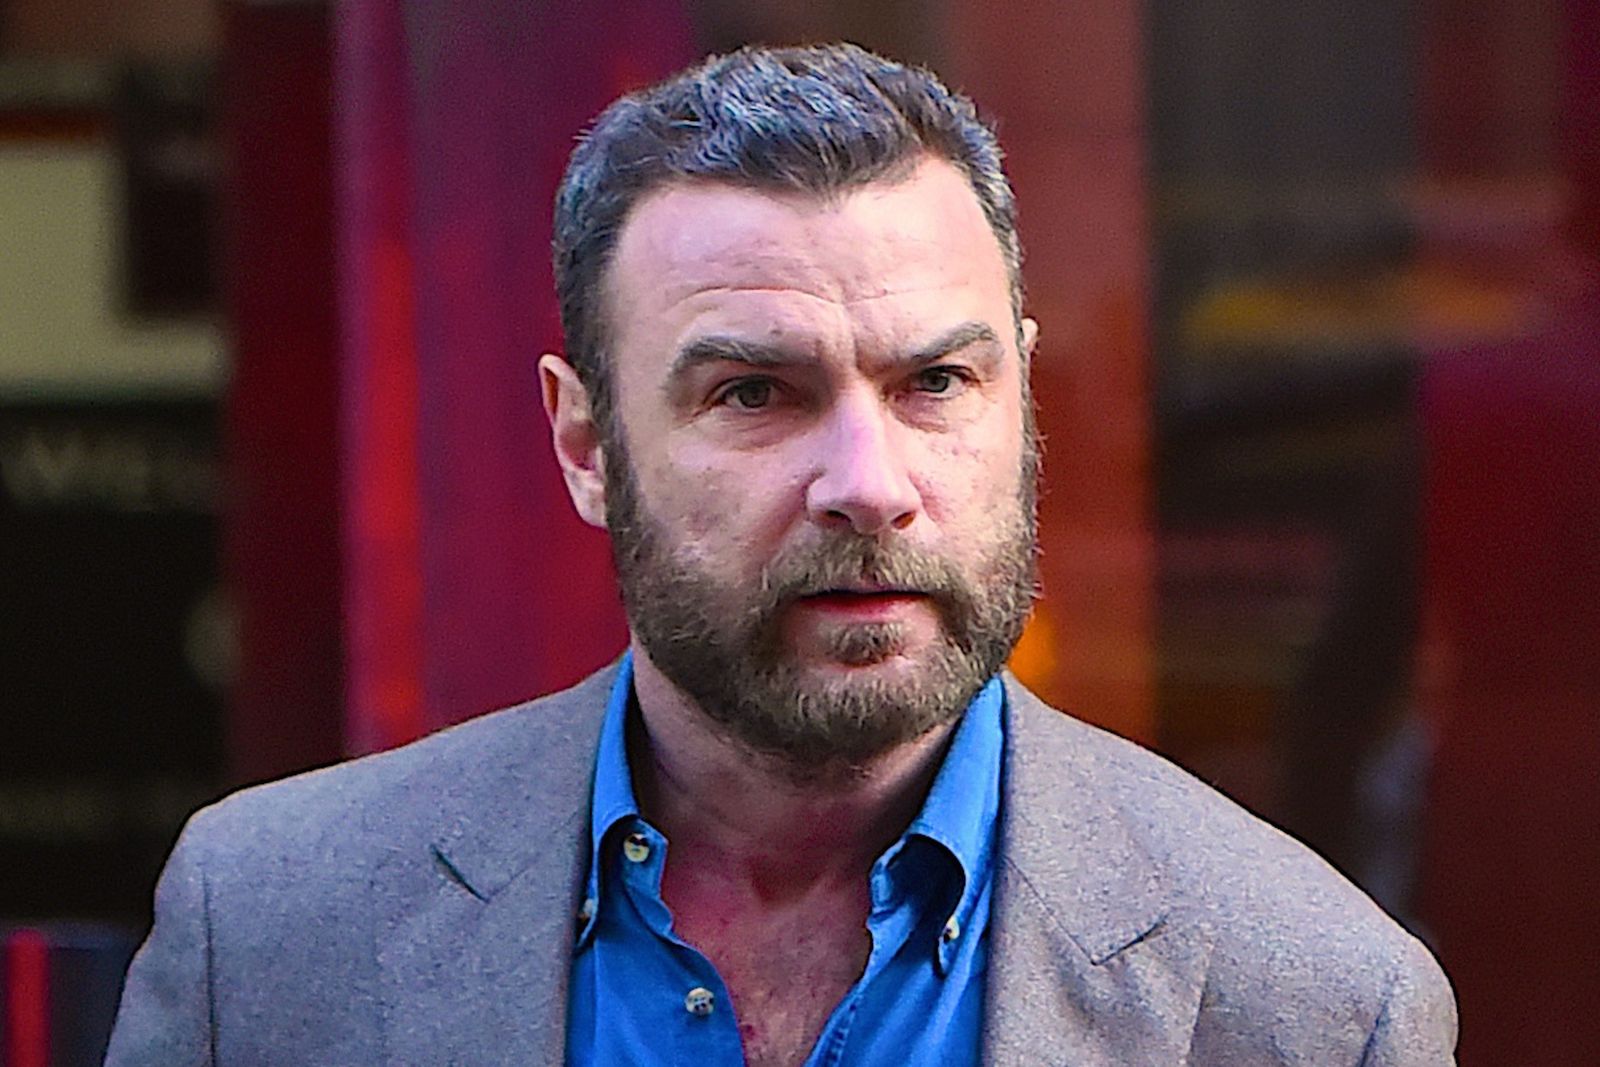 Liev Schreiber Rubbished All Harassment Charges